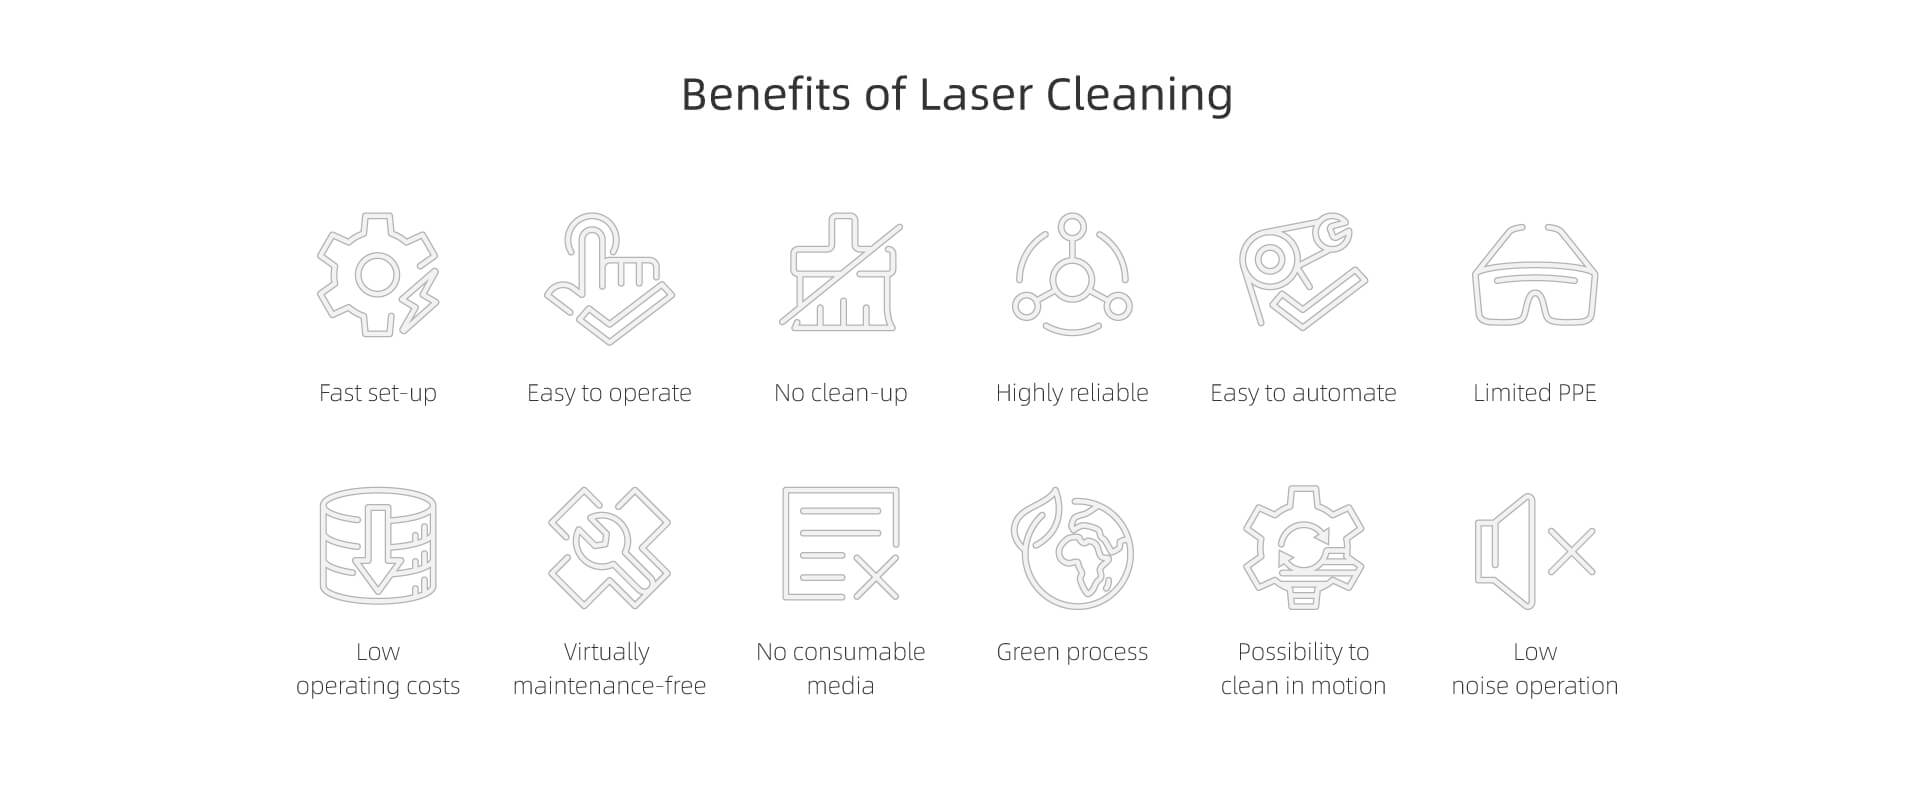 Benefits of laser cleaning machine